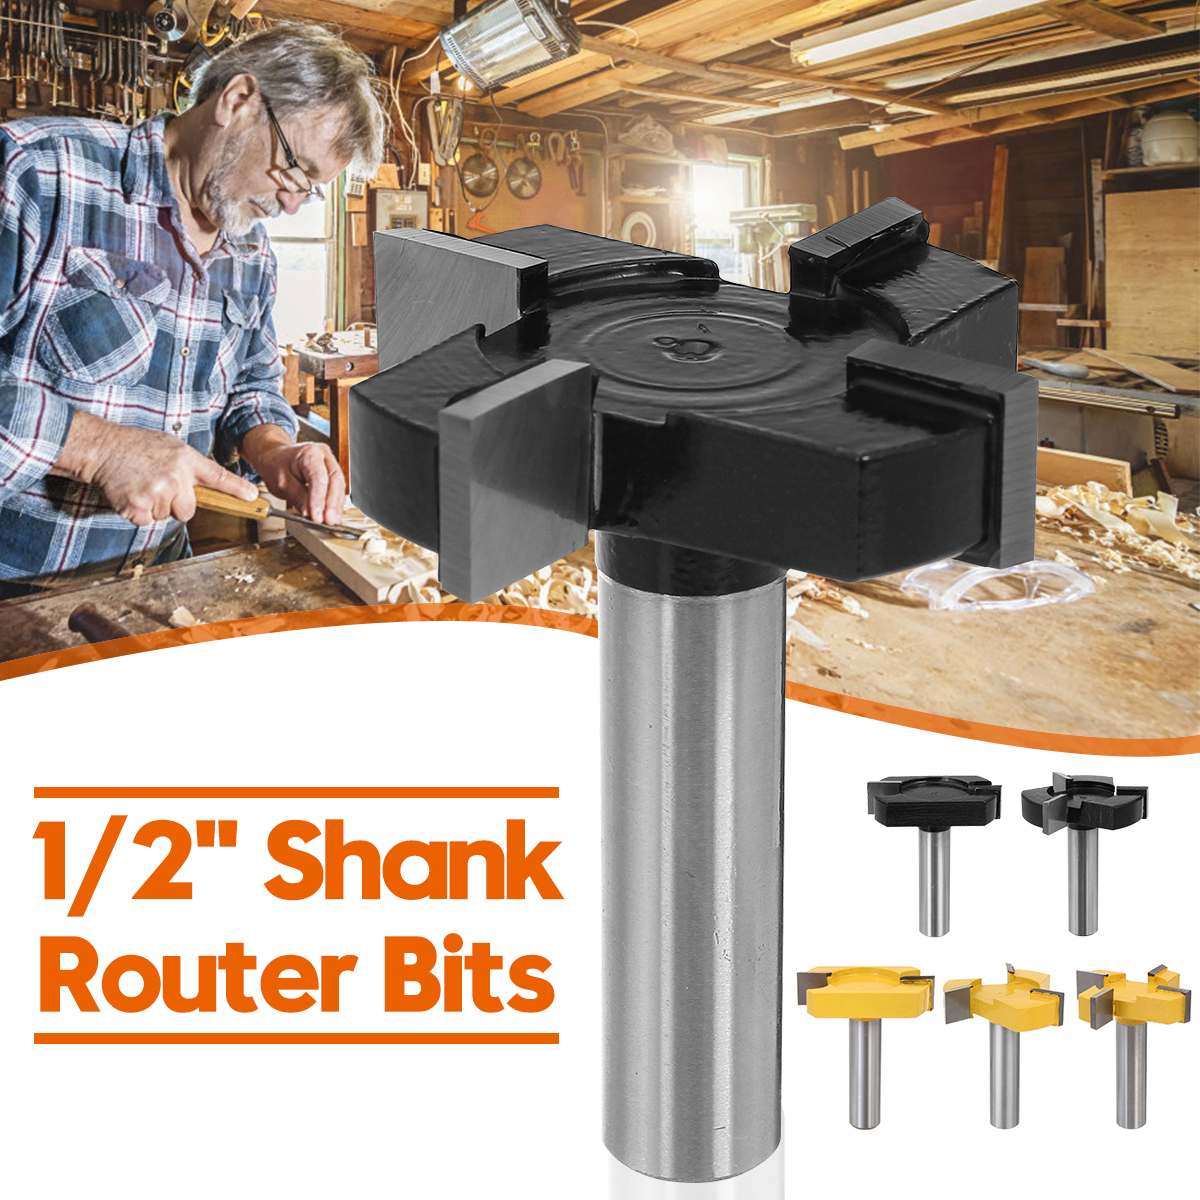 12-Inch-Shank-T-Router-Bit-34-Flutes-Trimming-Woodworking-Cutter-Wood-Working-Router-Bit-1678476-1